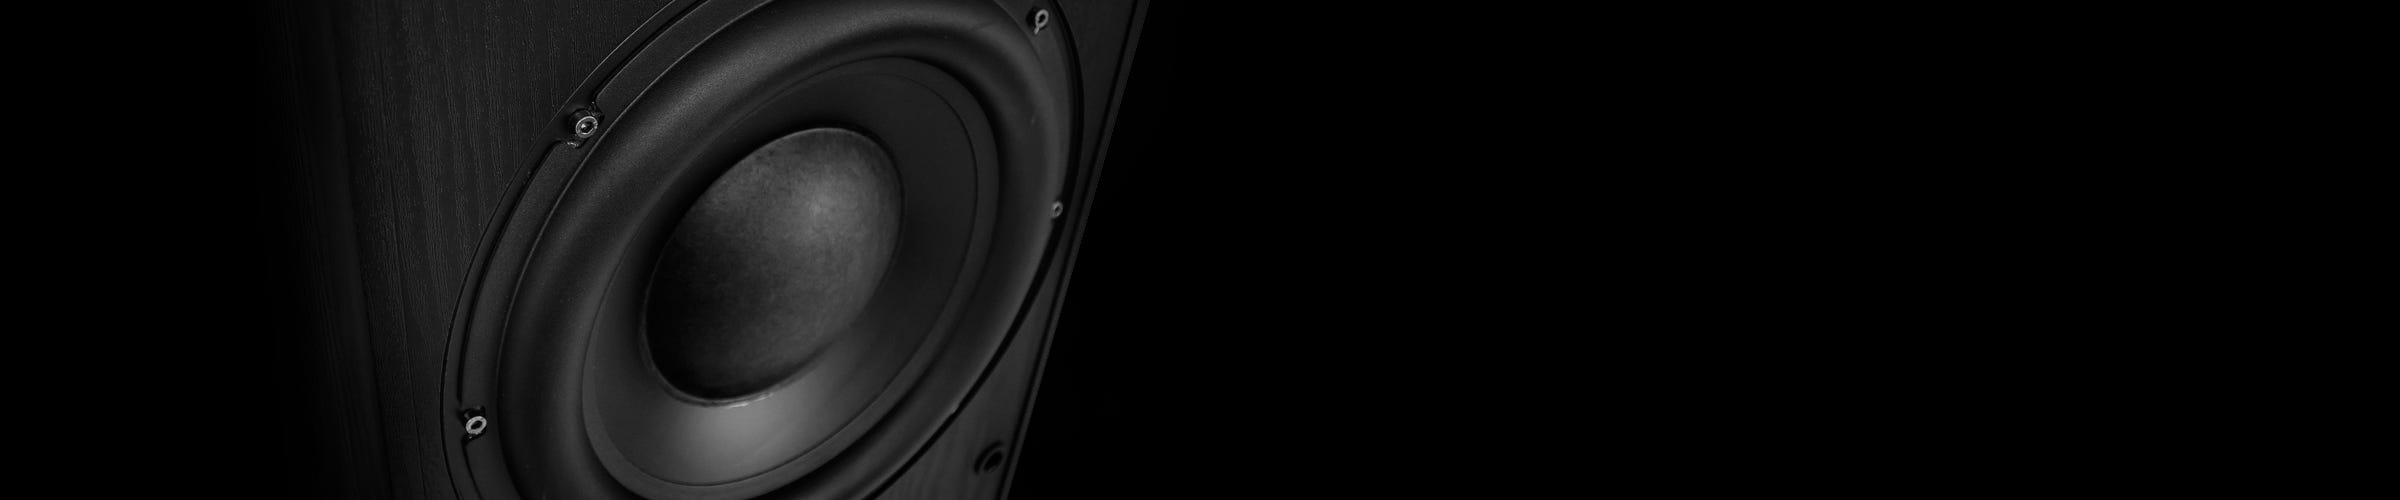 db150 powered subwoofer intro